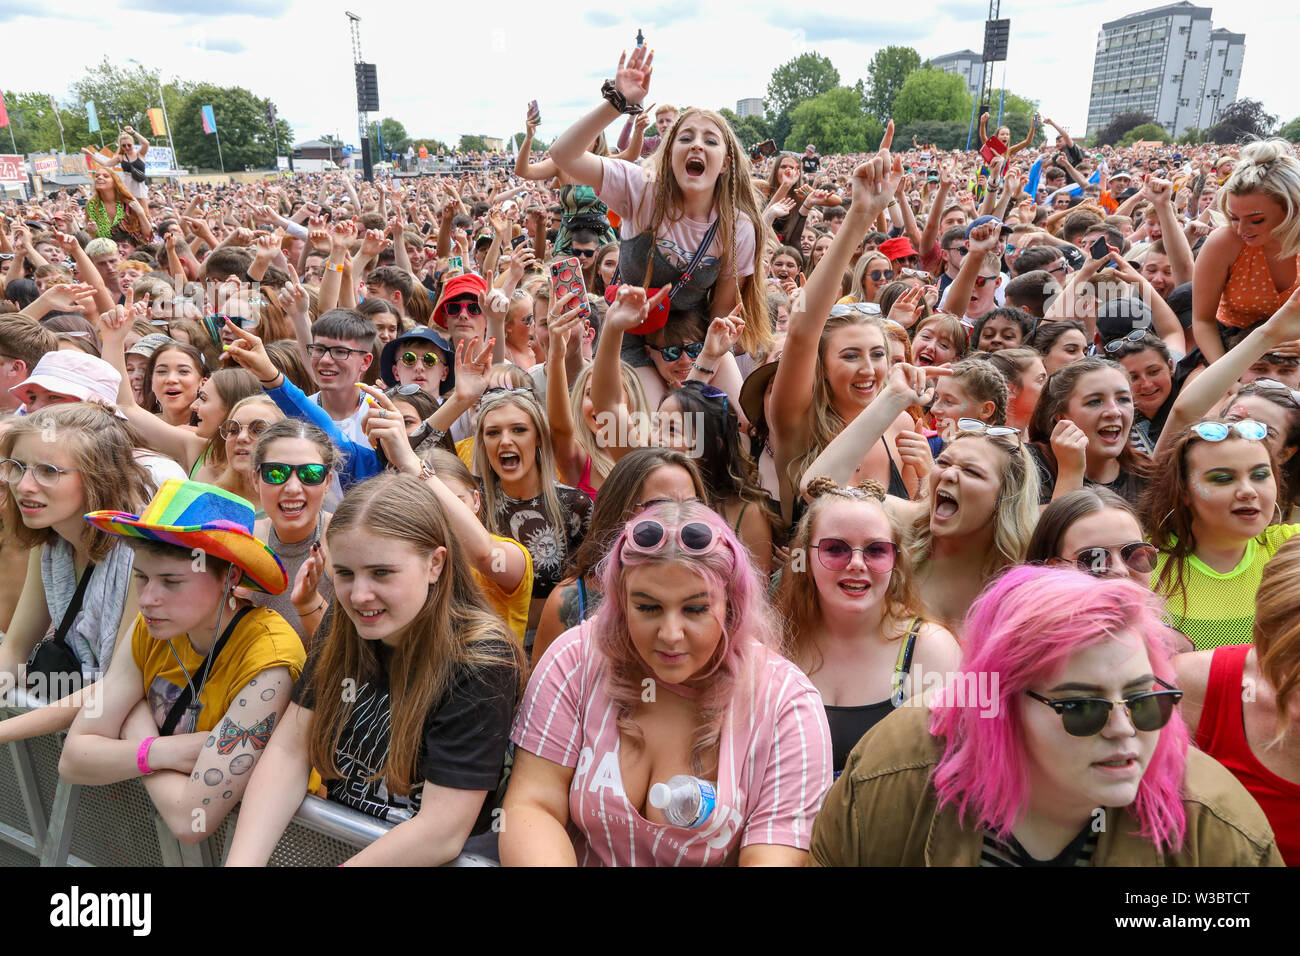 Glasgow, Scotland, UK. 14th July 2019. Thousands of music fans turned out at Glasgow Green, Glasgow, UK in a hot summers day, making this years TRNSMT festival  sell out. Many of the audience have travelled from all parts of the UK and sometimes beyond just to enjoy the music and experience Credit: Findlay/Alamy Live News Stock Photo